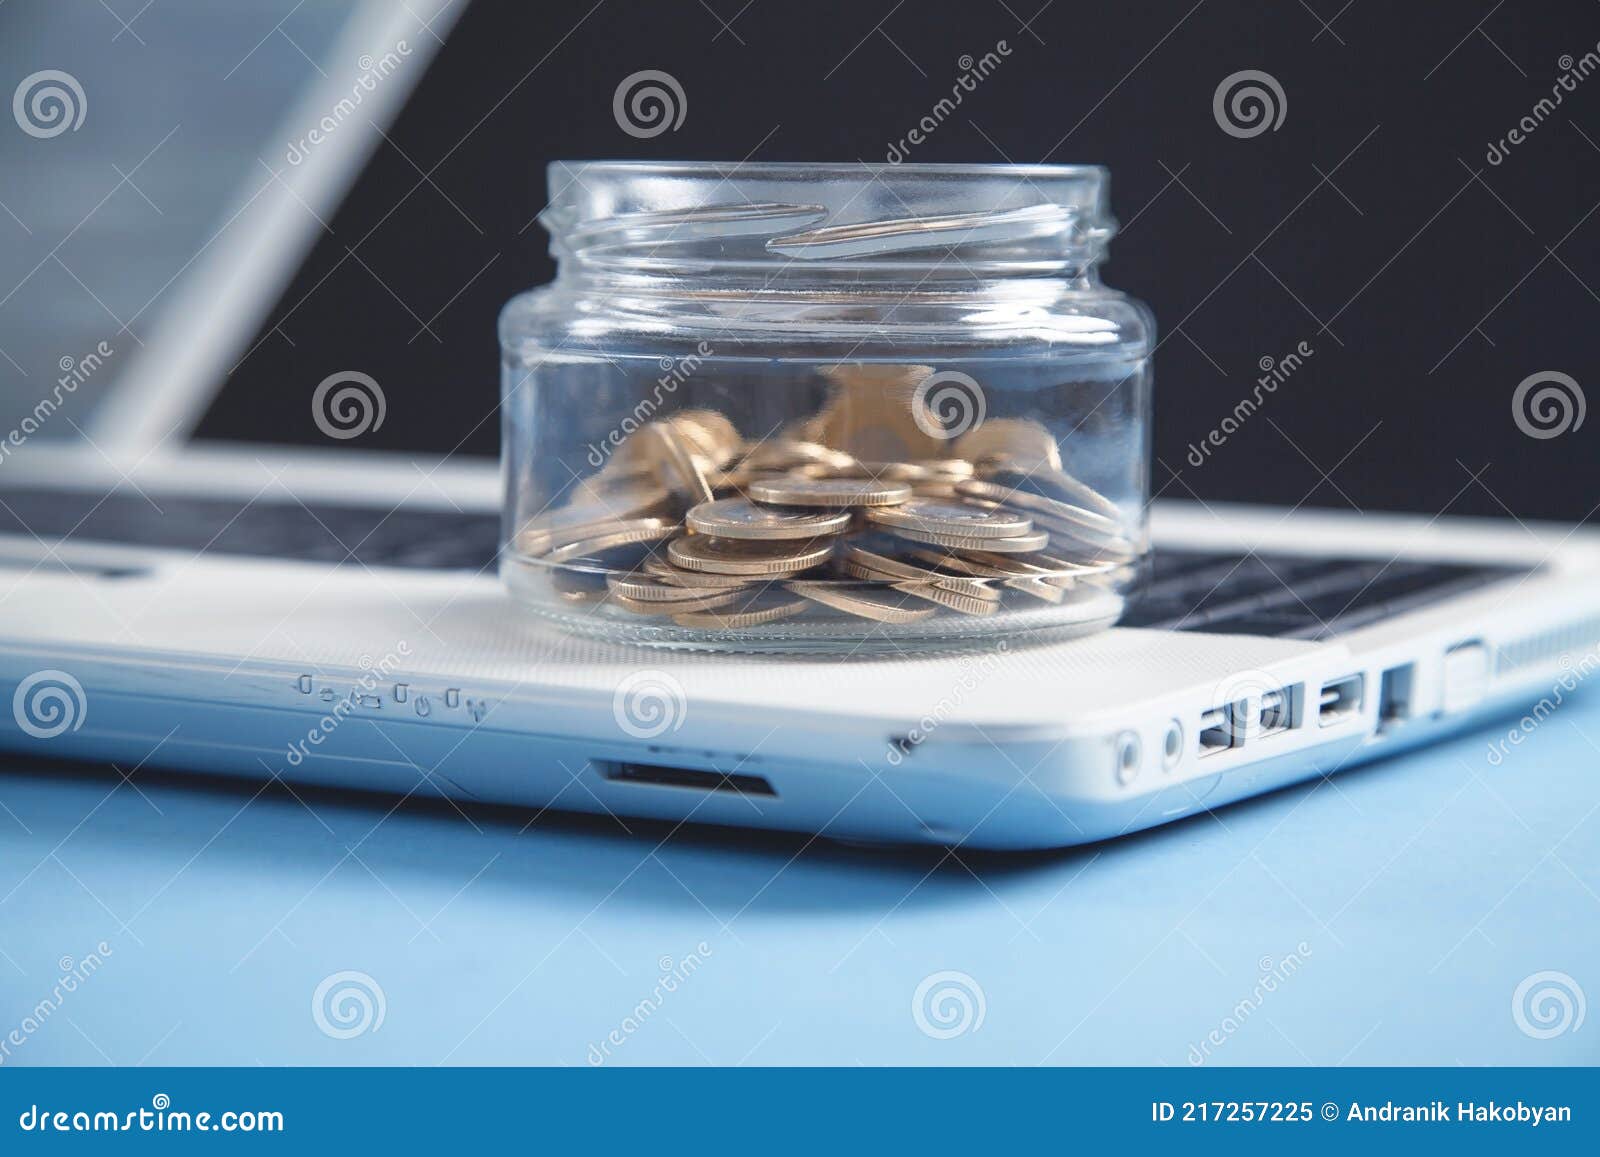 Magnifying glass and coins on the white desk.